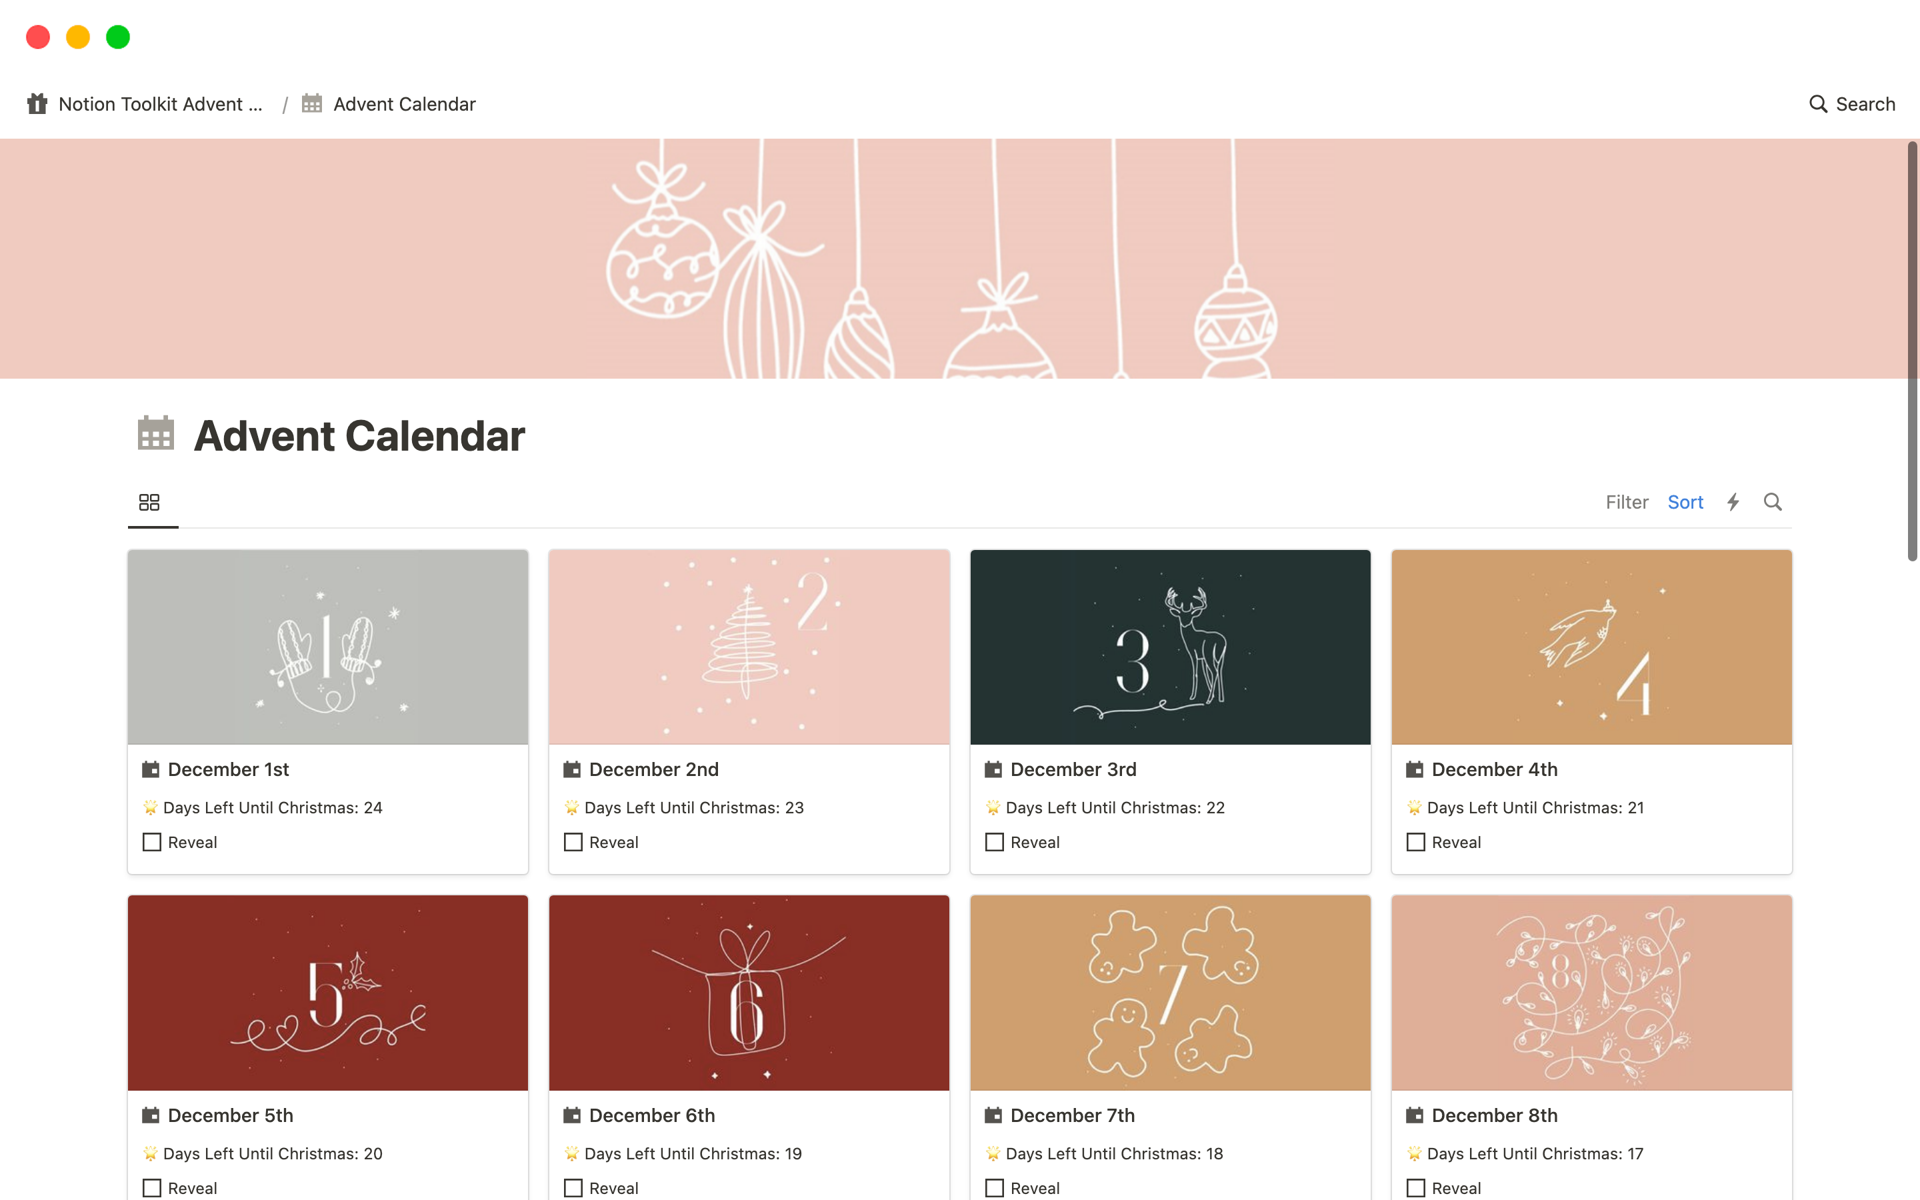 A Notion Toolkit Advent Calendar full of cool, fun and mostly free Notion resources to make your Notion pages more efficient, organized and interesting.